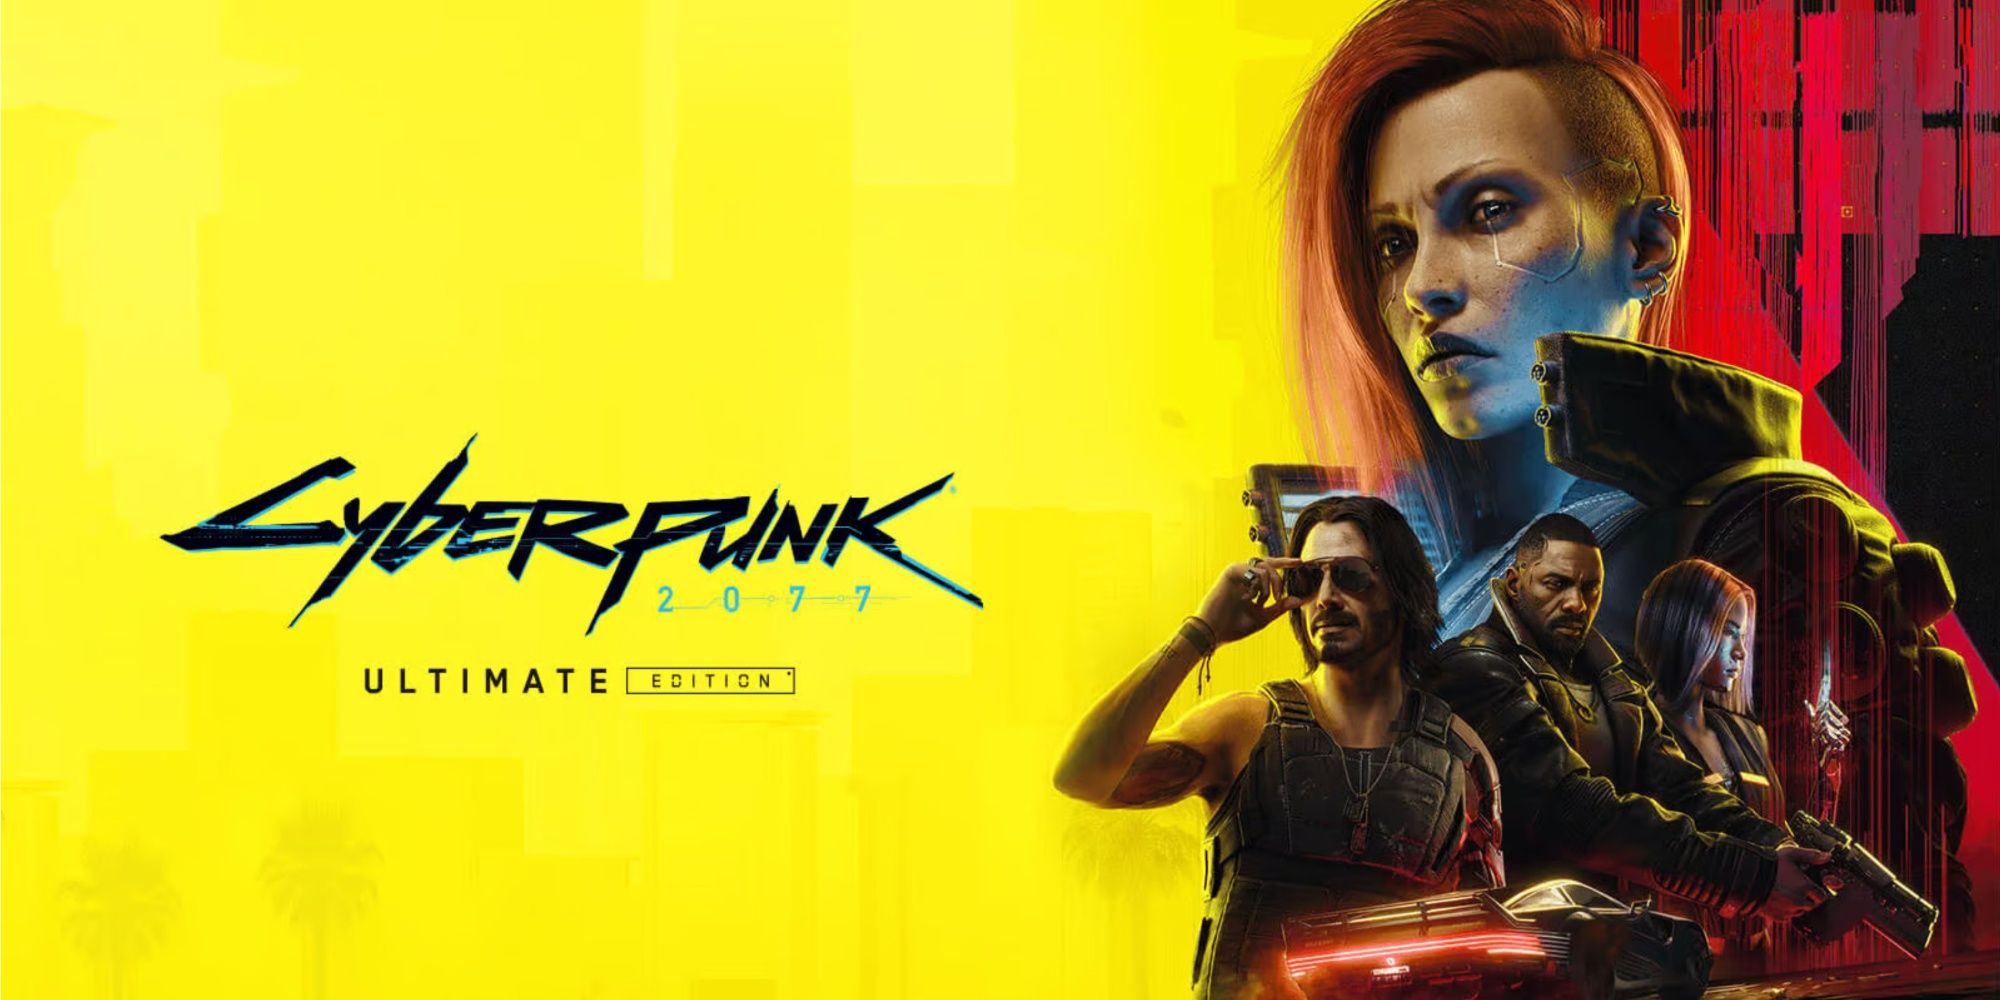 cyberpunk 2077 characters on the ultimate edition key art